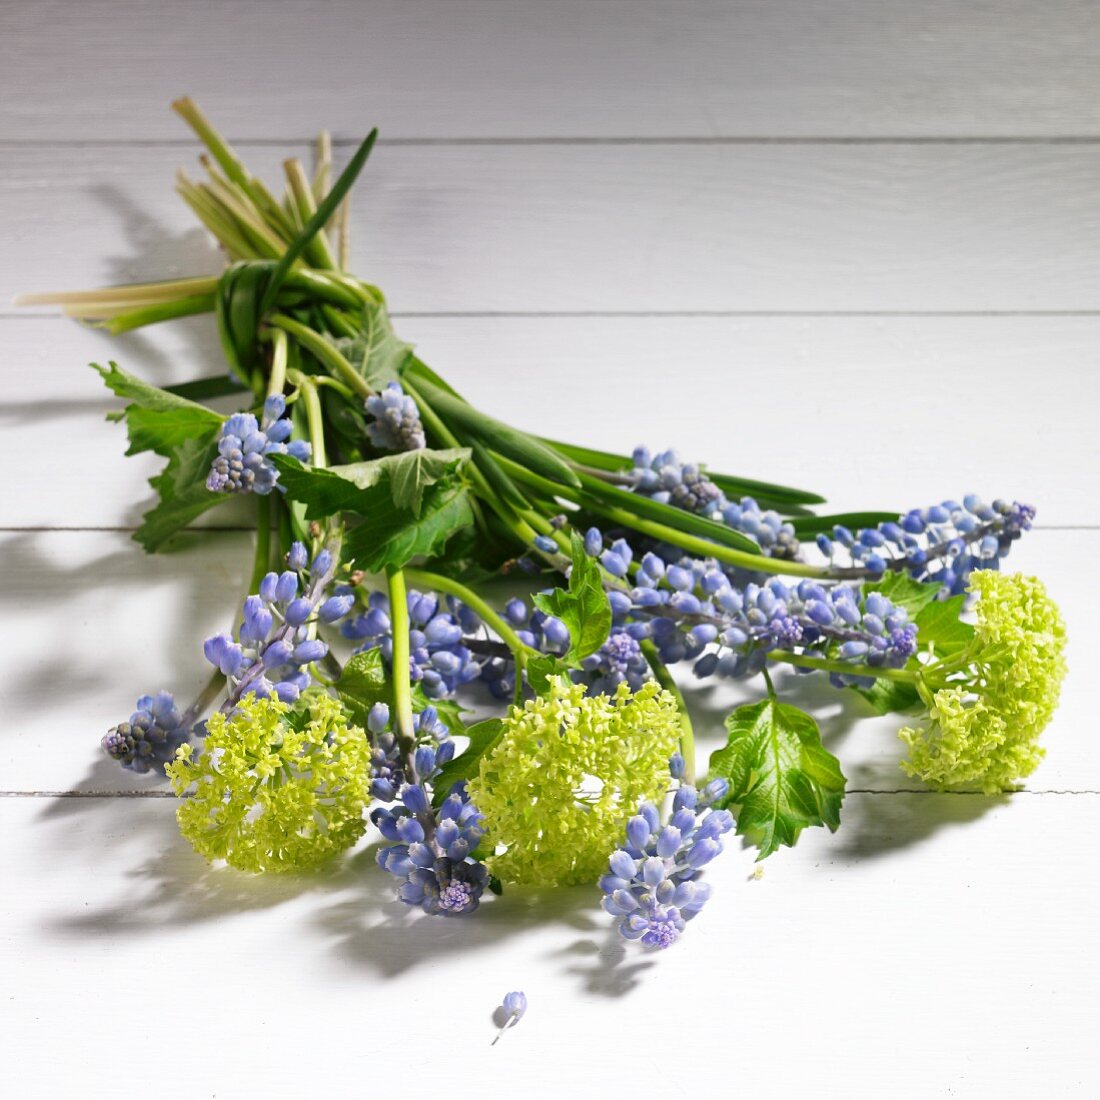 Spring bouquet of grape hyacinth and viburnum